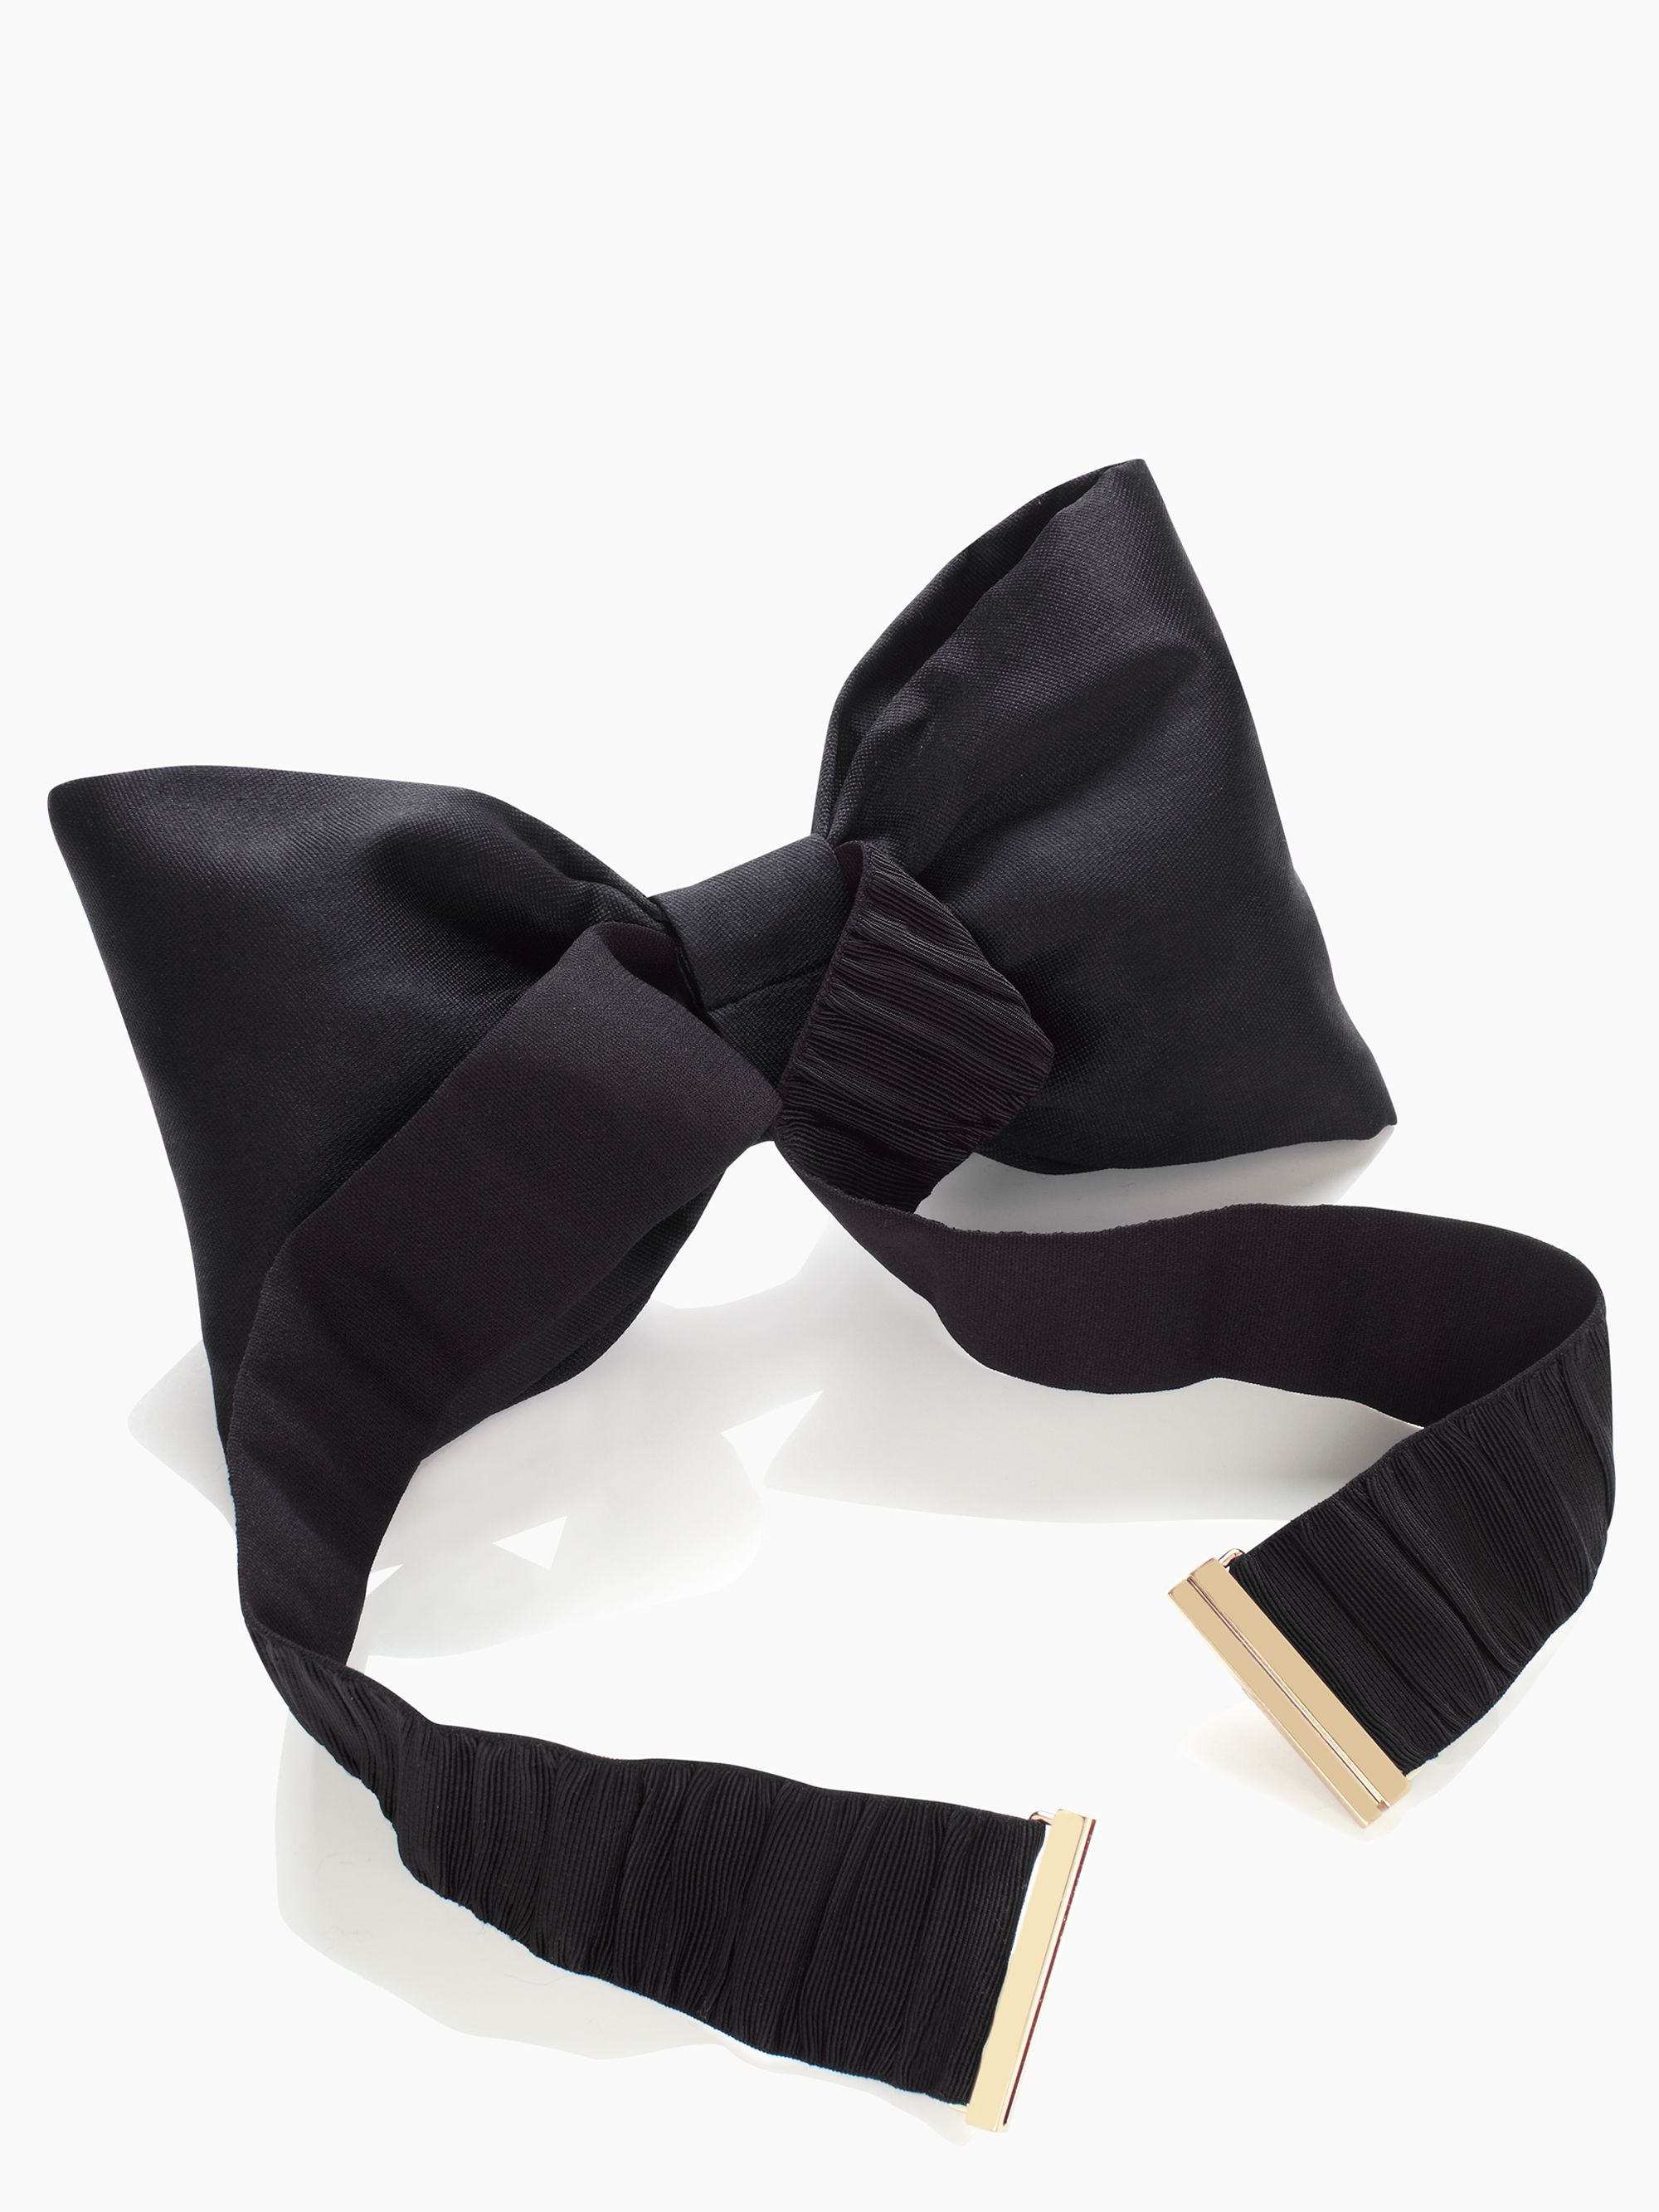 Kate spade new york Oversized Structured Bow Belt in Black | Lyst